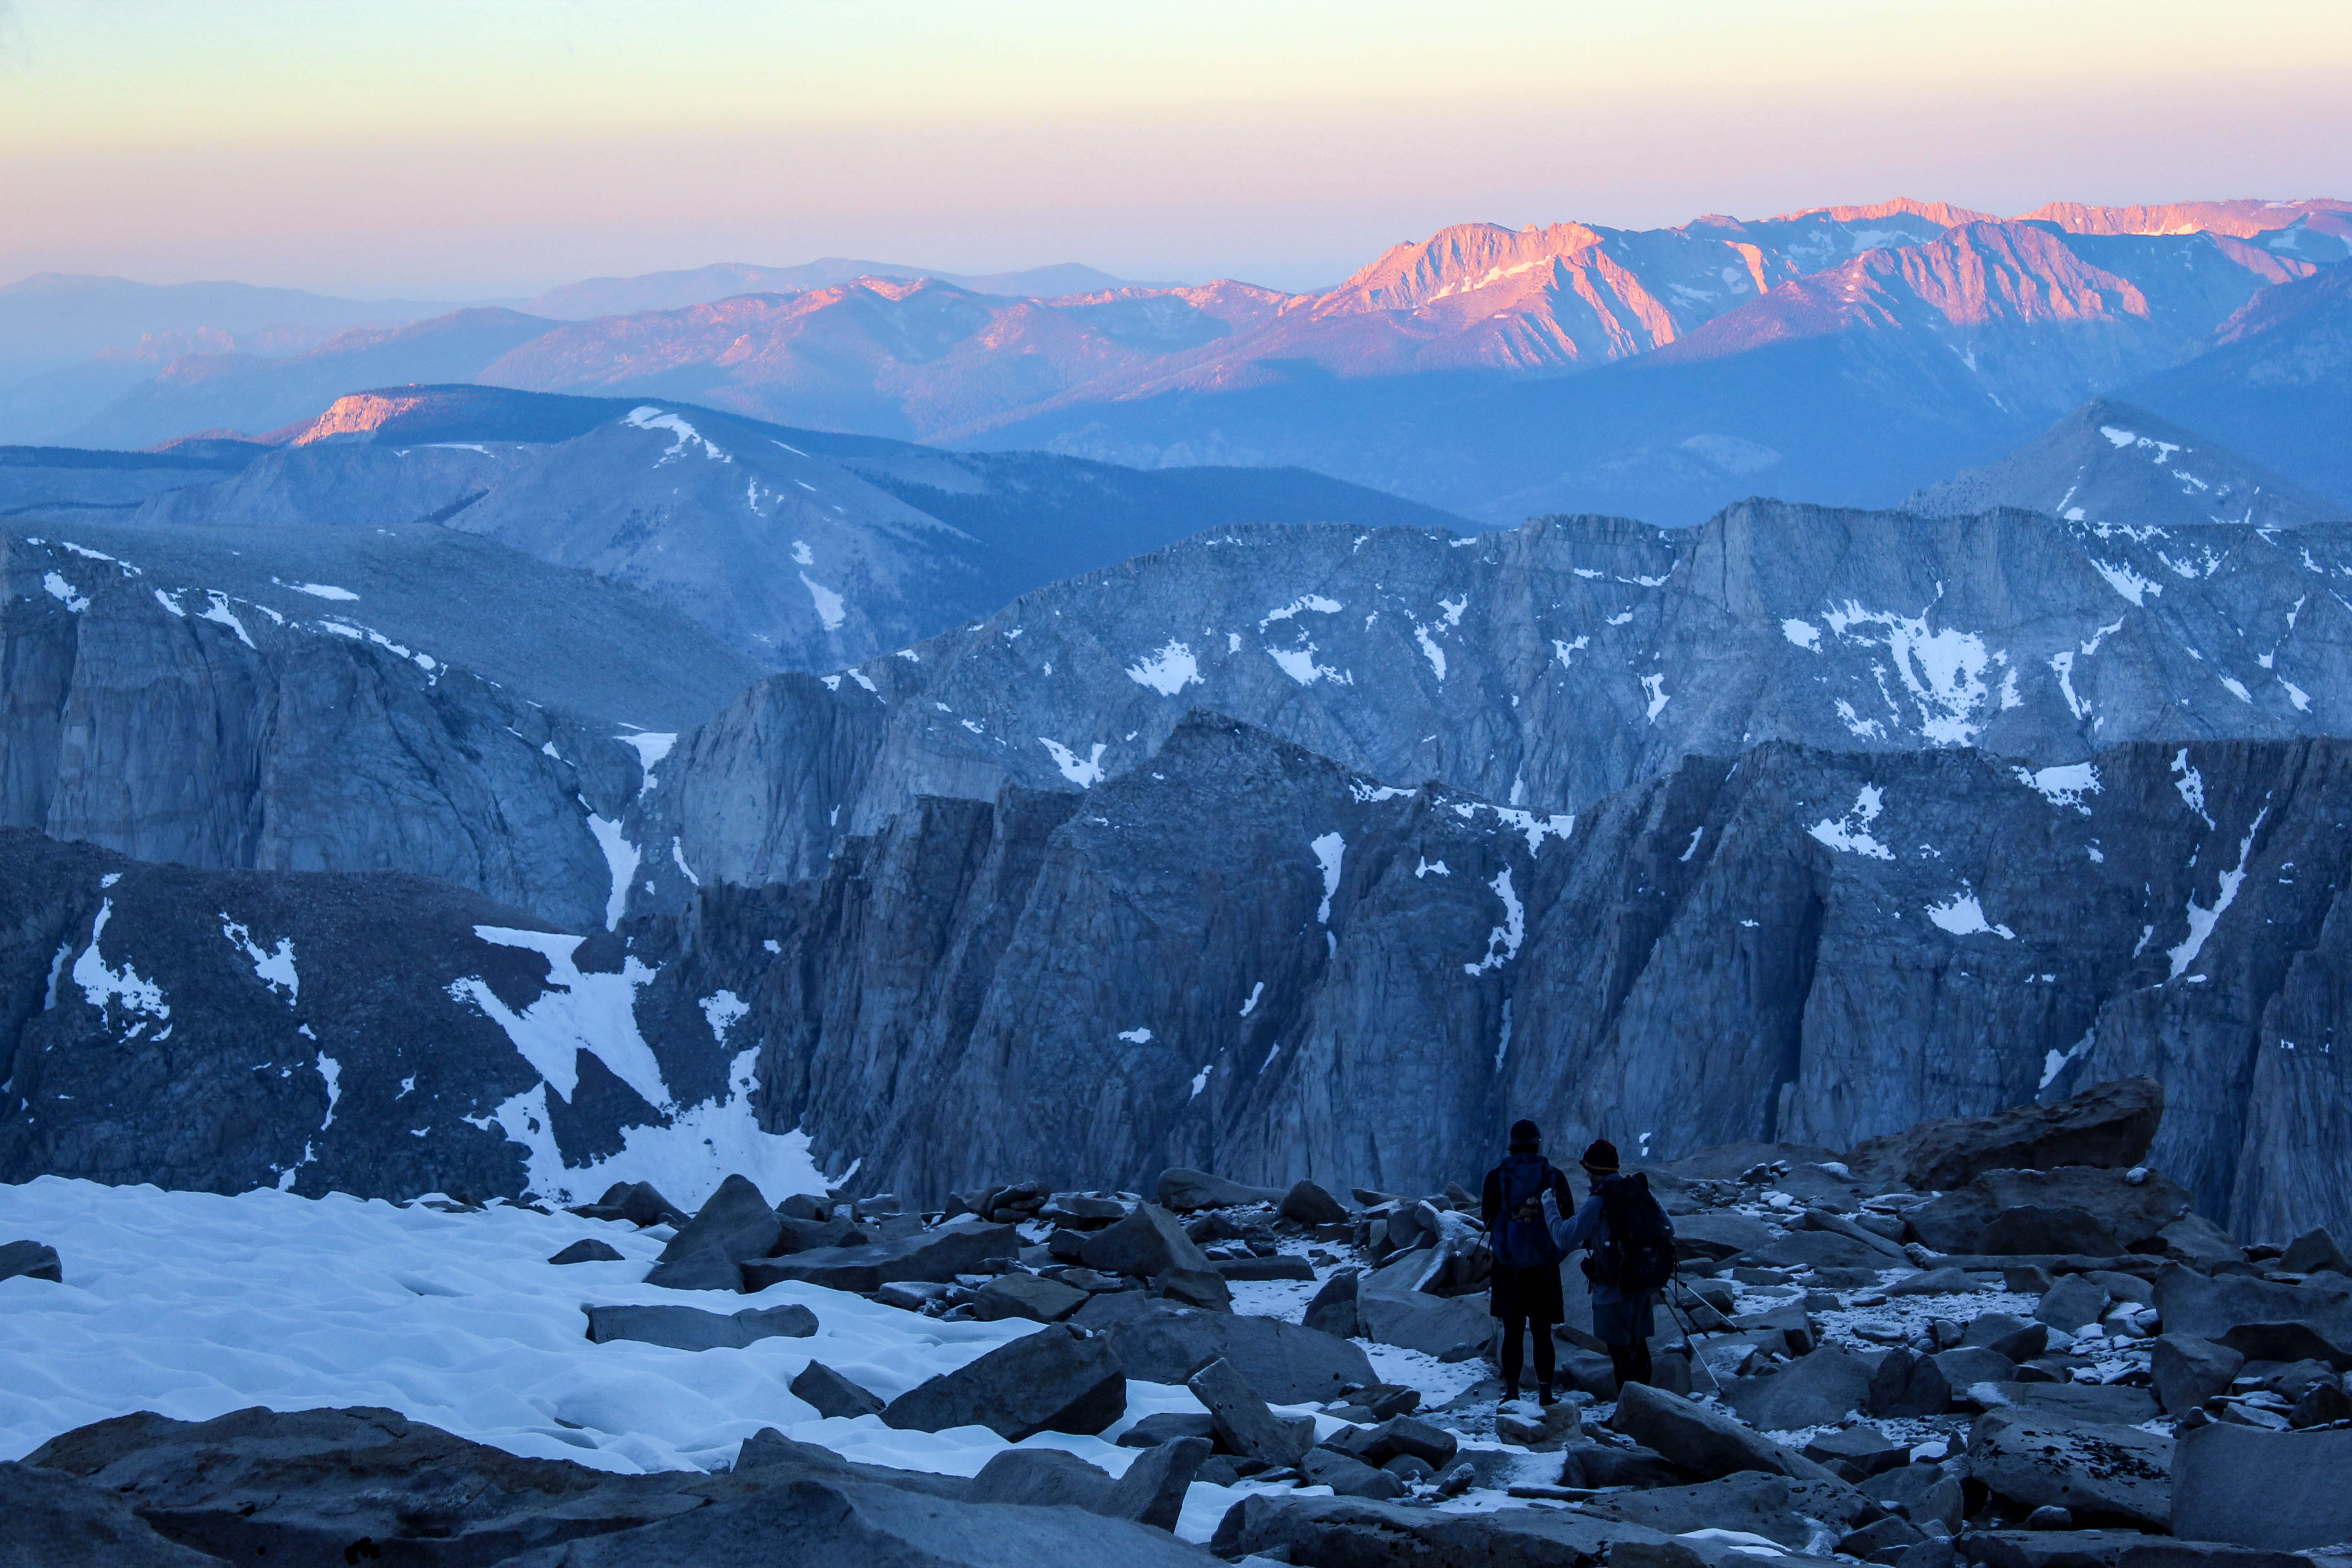 Me and a friend descend Mount Whitney as alpine glow ascends over the peaks neighboring the mountain with the first morning light.